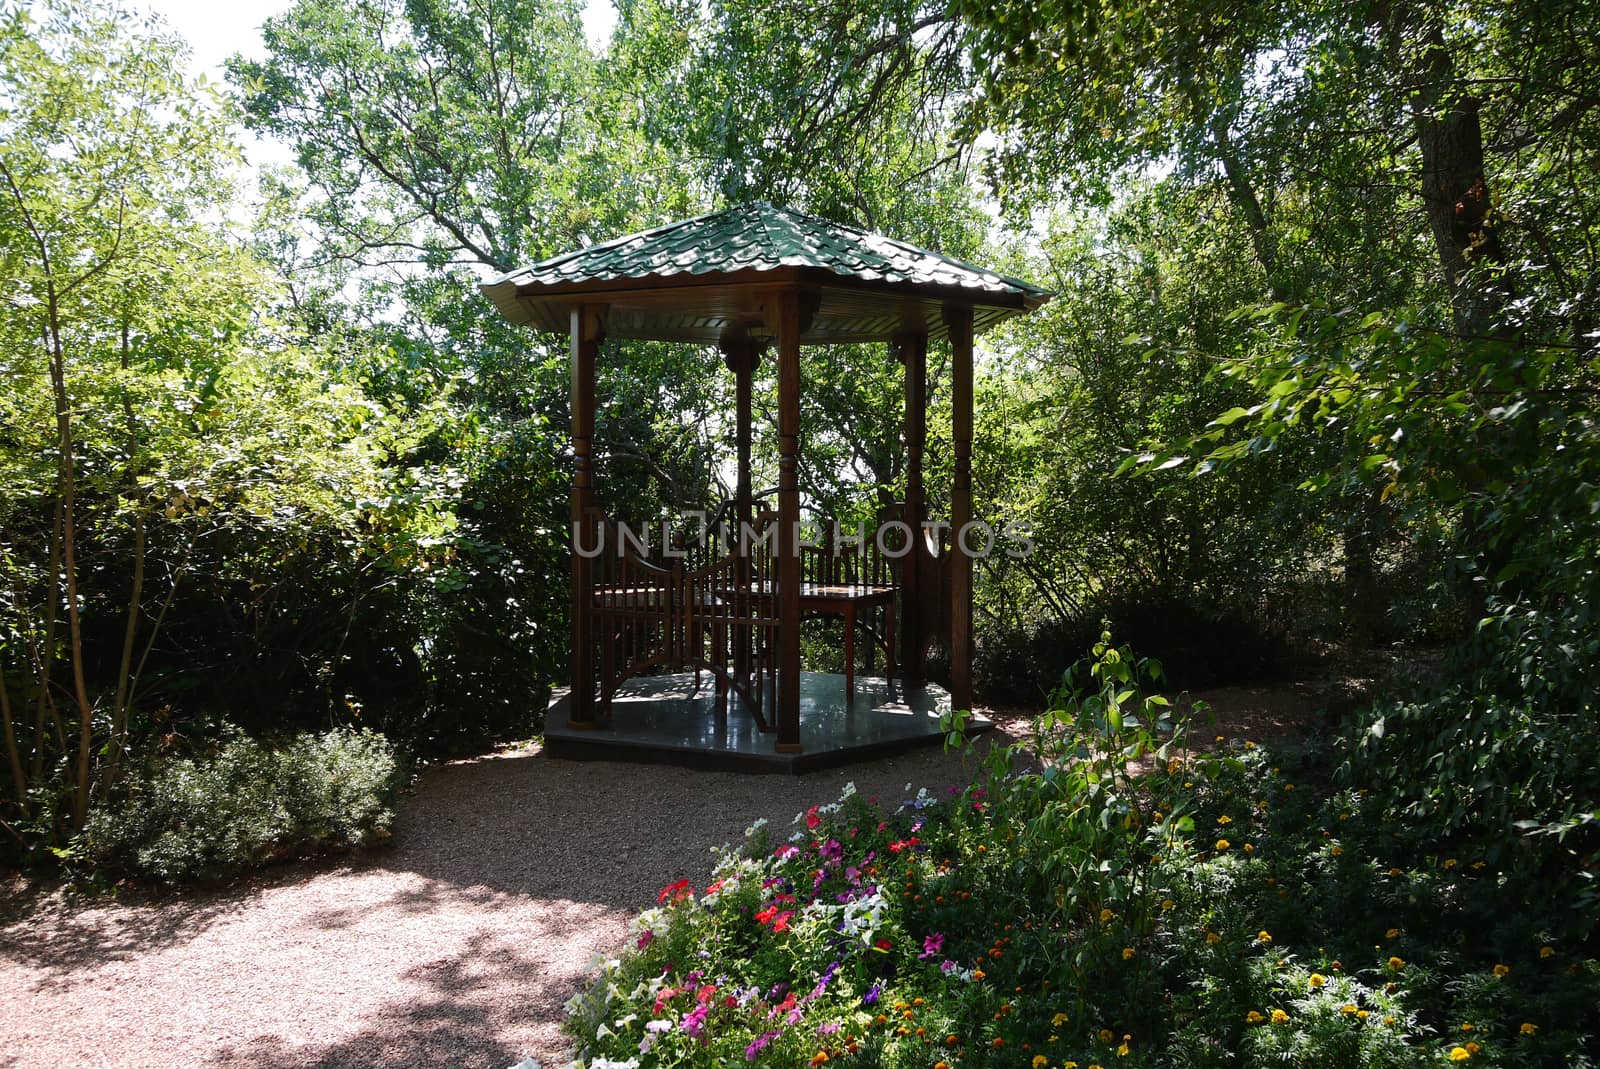 A tiny gazebo in the garden. You can sit and enjoy the scents in the air by Adamchuk